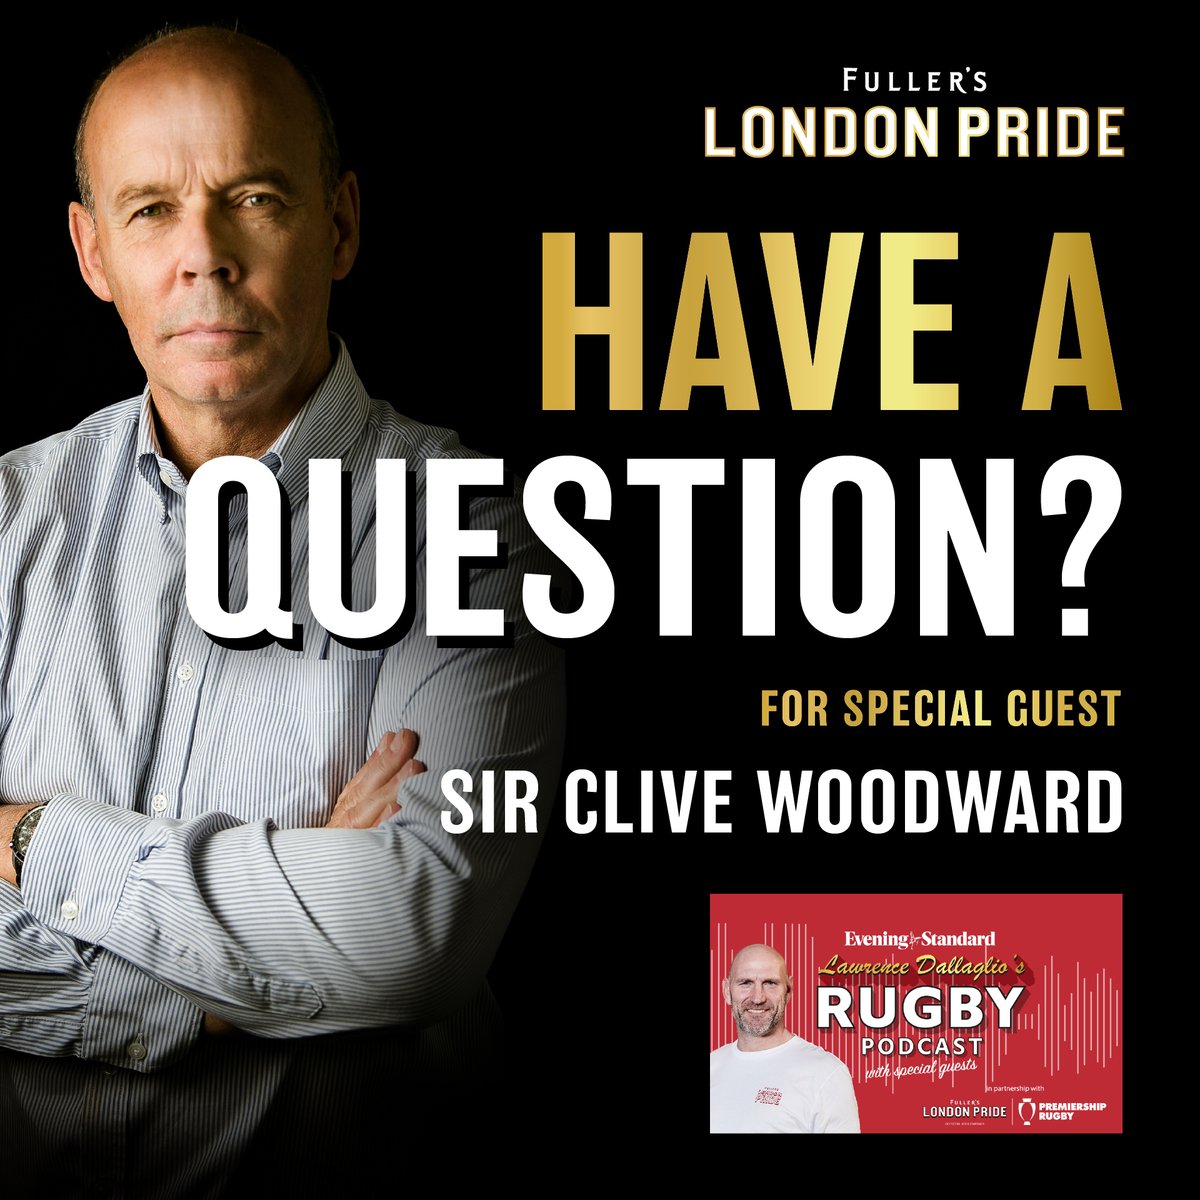 Comment below for the next episode of @dallaglio8 Rugby Podcast.

Outstanding questions for @CliveWoodward might receive some bottles of Pride. 🍻

Episode coming soon. 🏉

@standardsport @premrugby #SupportwithPride #DrinkResponsibly